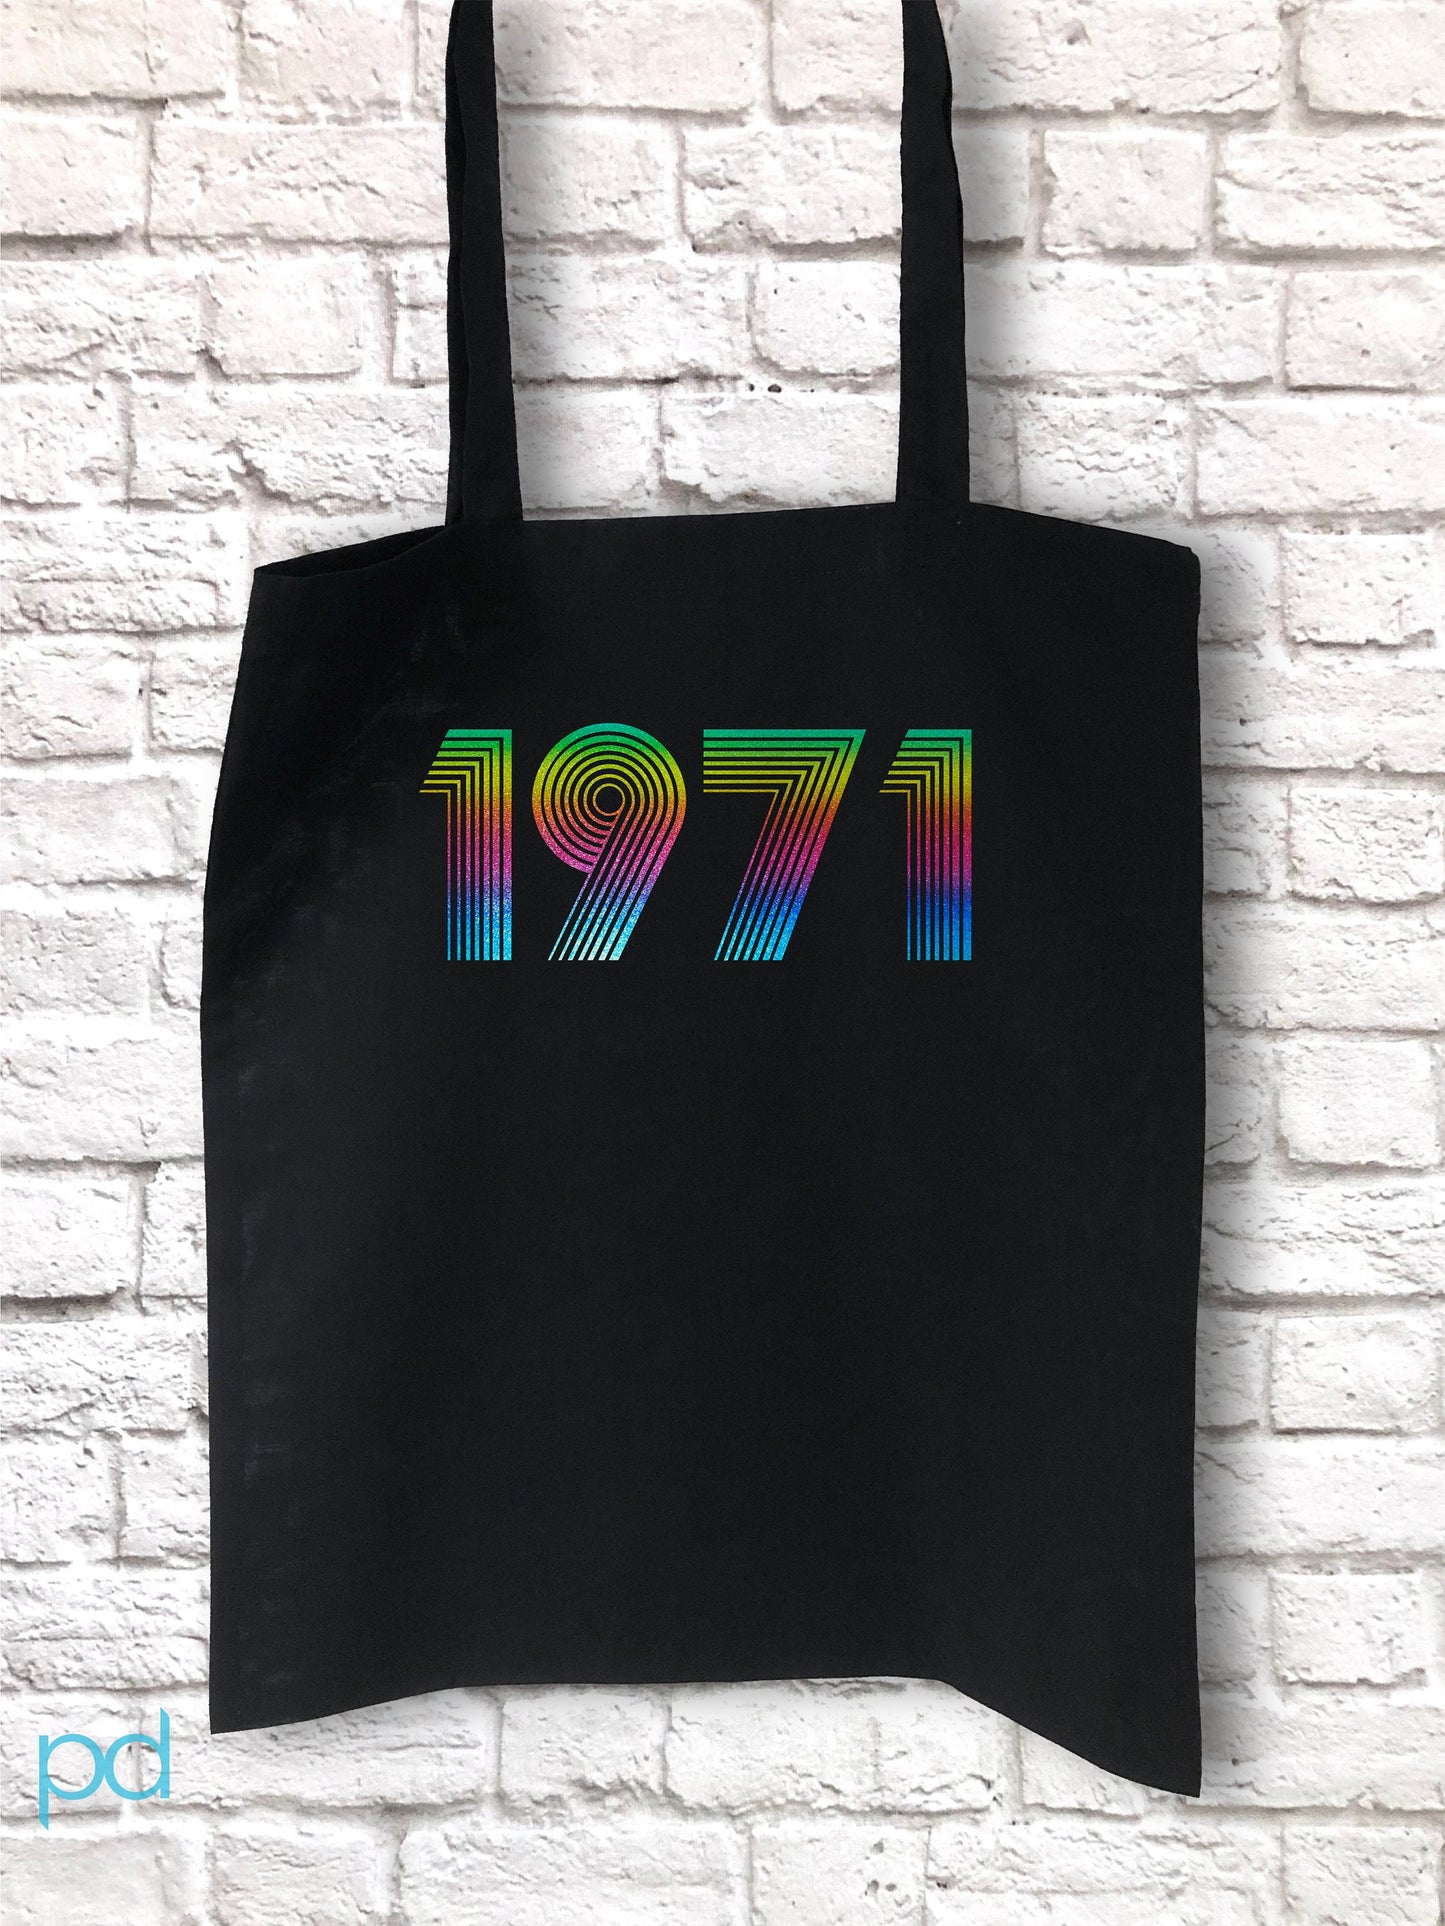 1971 Tote Bag Funky Effect Vinyl HTV, 51st Birthday Gift Shopping Carrier in Retro & Vintage 70s style, Fiftieth Unisex Tote Bag